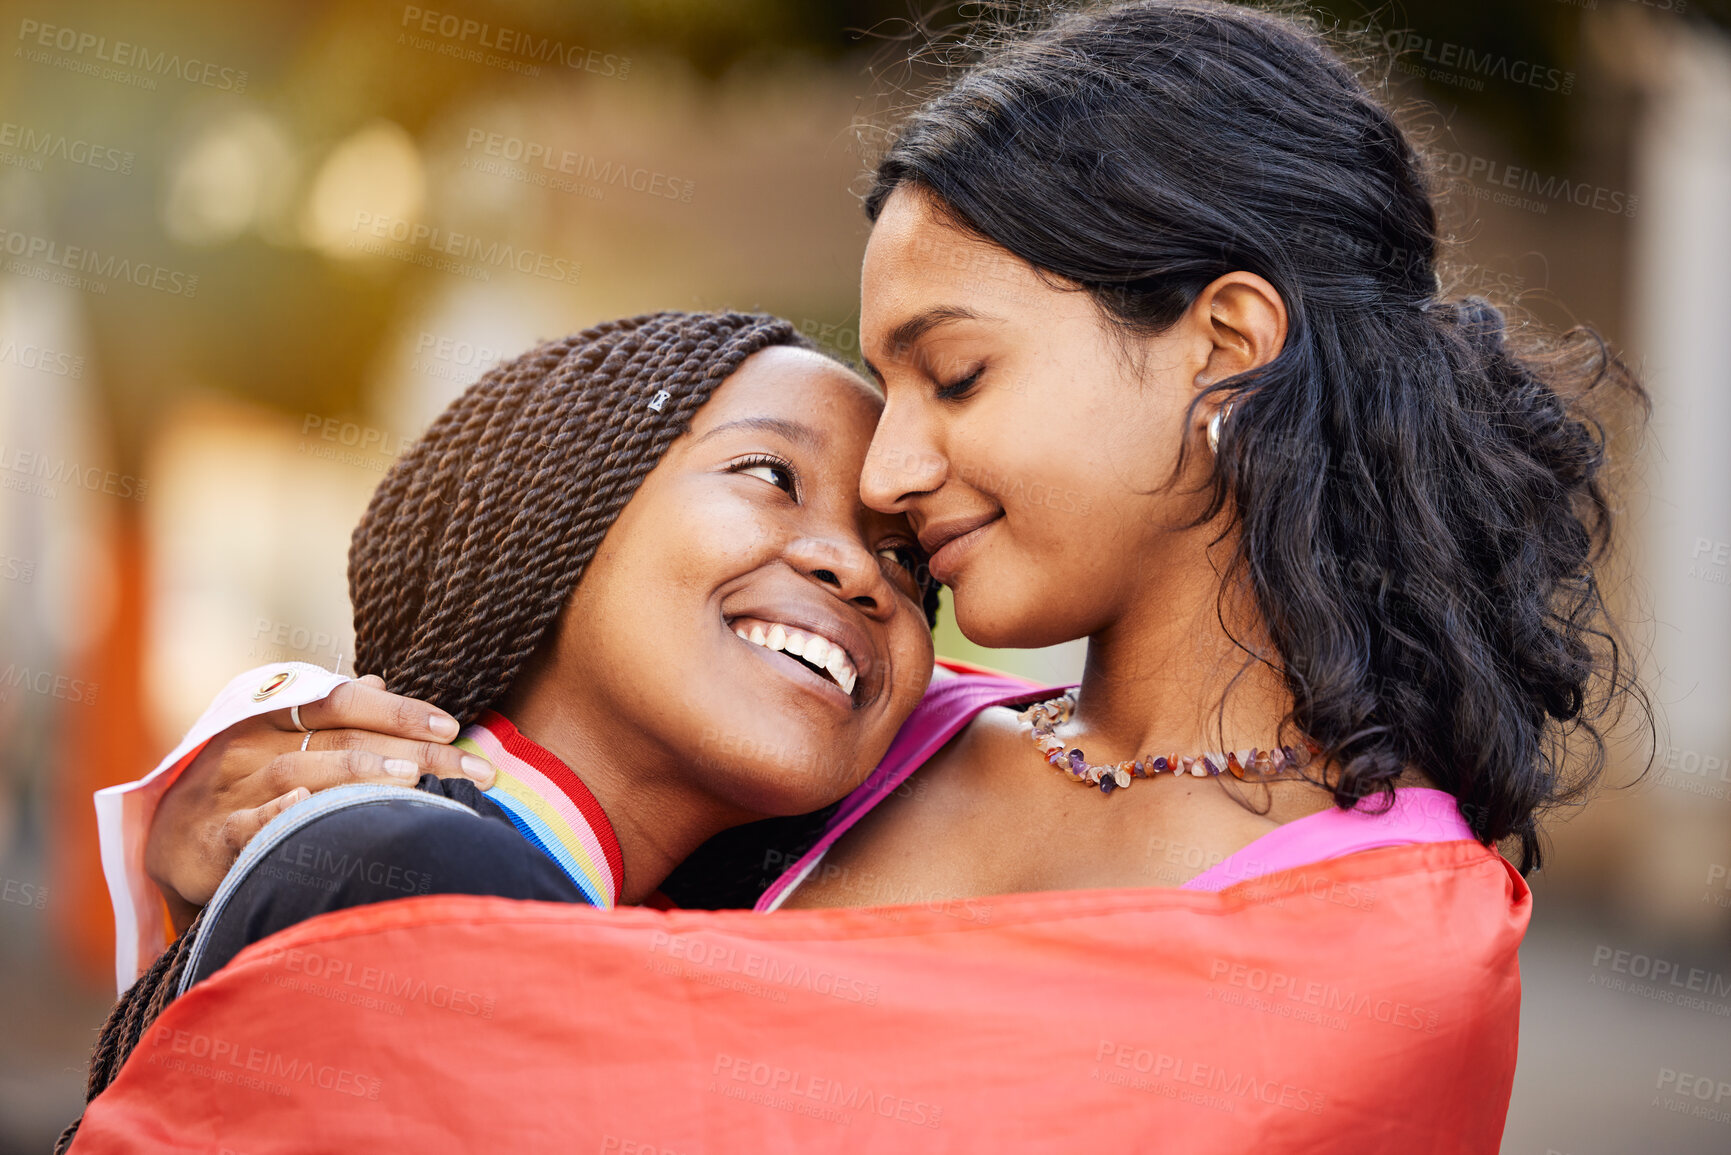 Buy stock photo Love, hug and happy lesbian couple at a freedom, equality or LGBTQ festival, event or parade. Happiness, smile and gen z interracial gay women embracing, hugging and bonding together in the city.